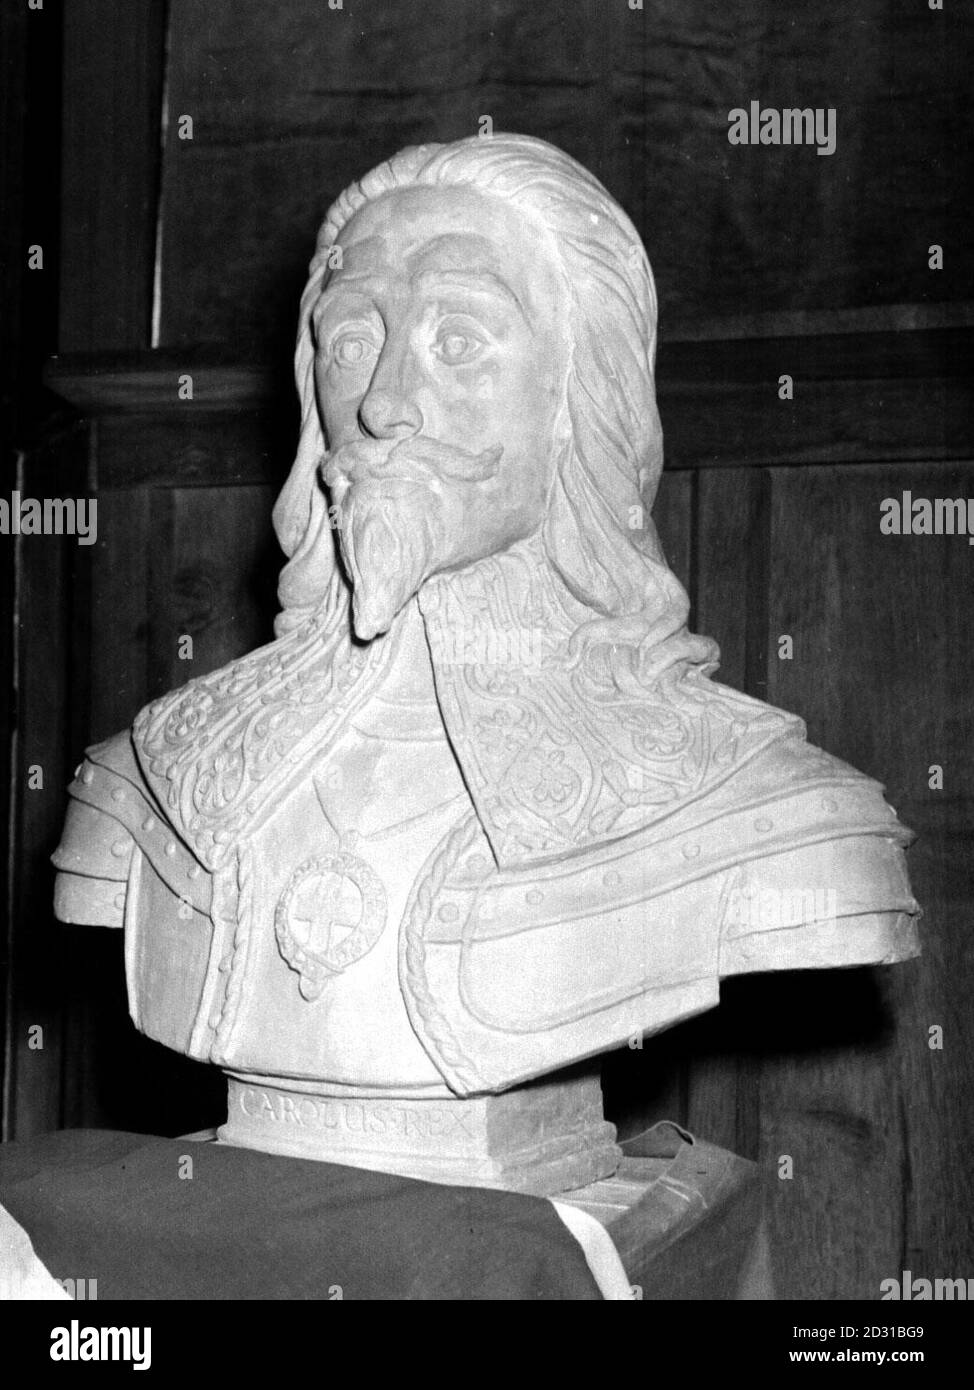 KING CHARLES I : A bust of King Charles I (King from 1625-1649) at Swindon, Wiltshire. He ruled for 11 years without Parliament until rebellion broke out in Scotland.  Conflict with Parliament led to the English Civil War, ending in 1649 with Charles'  trial and execution. Stock Photo